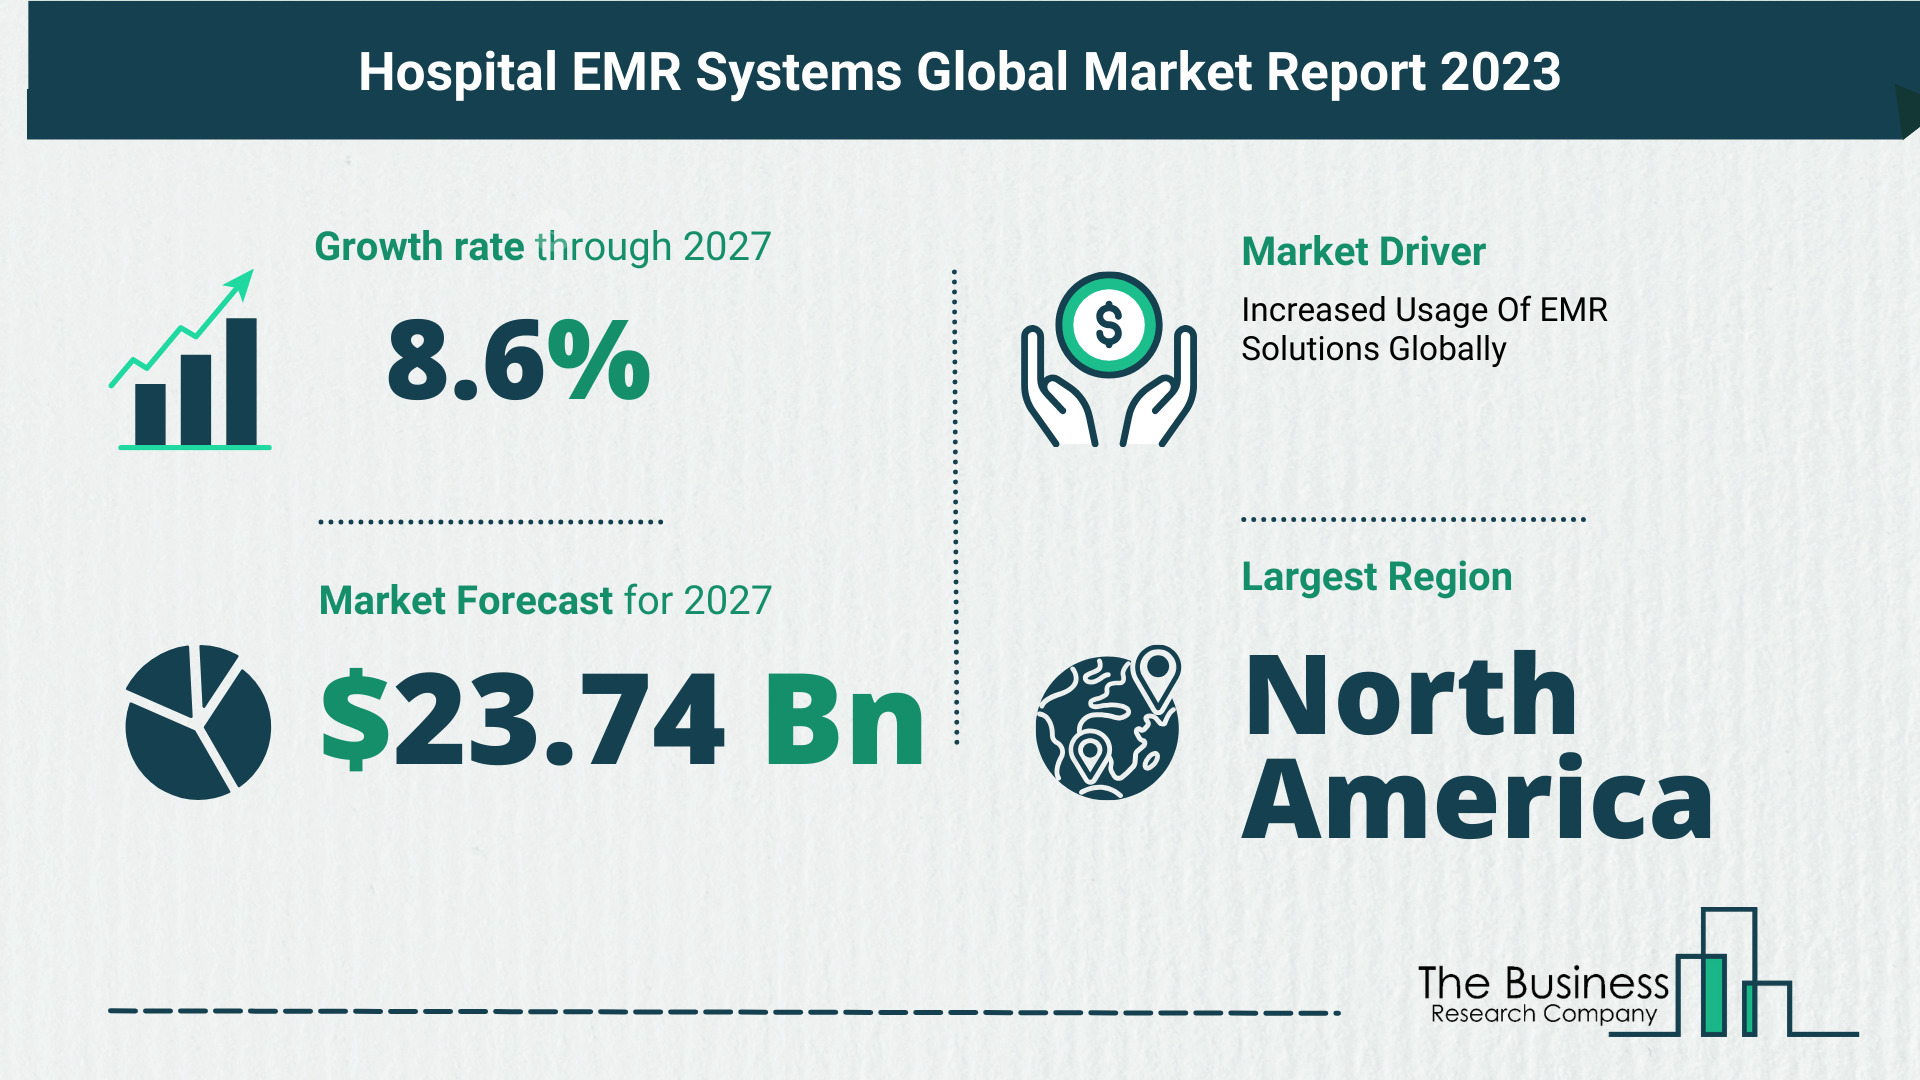 Key Trends And Drivers In The Hospital EMR Systems Market 2023